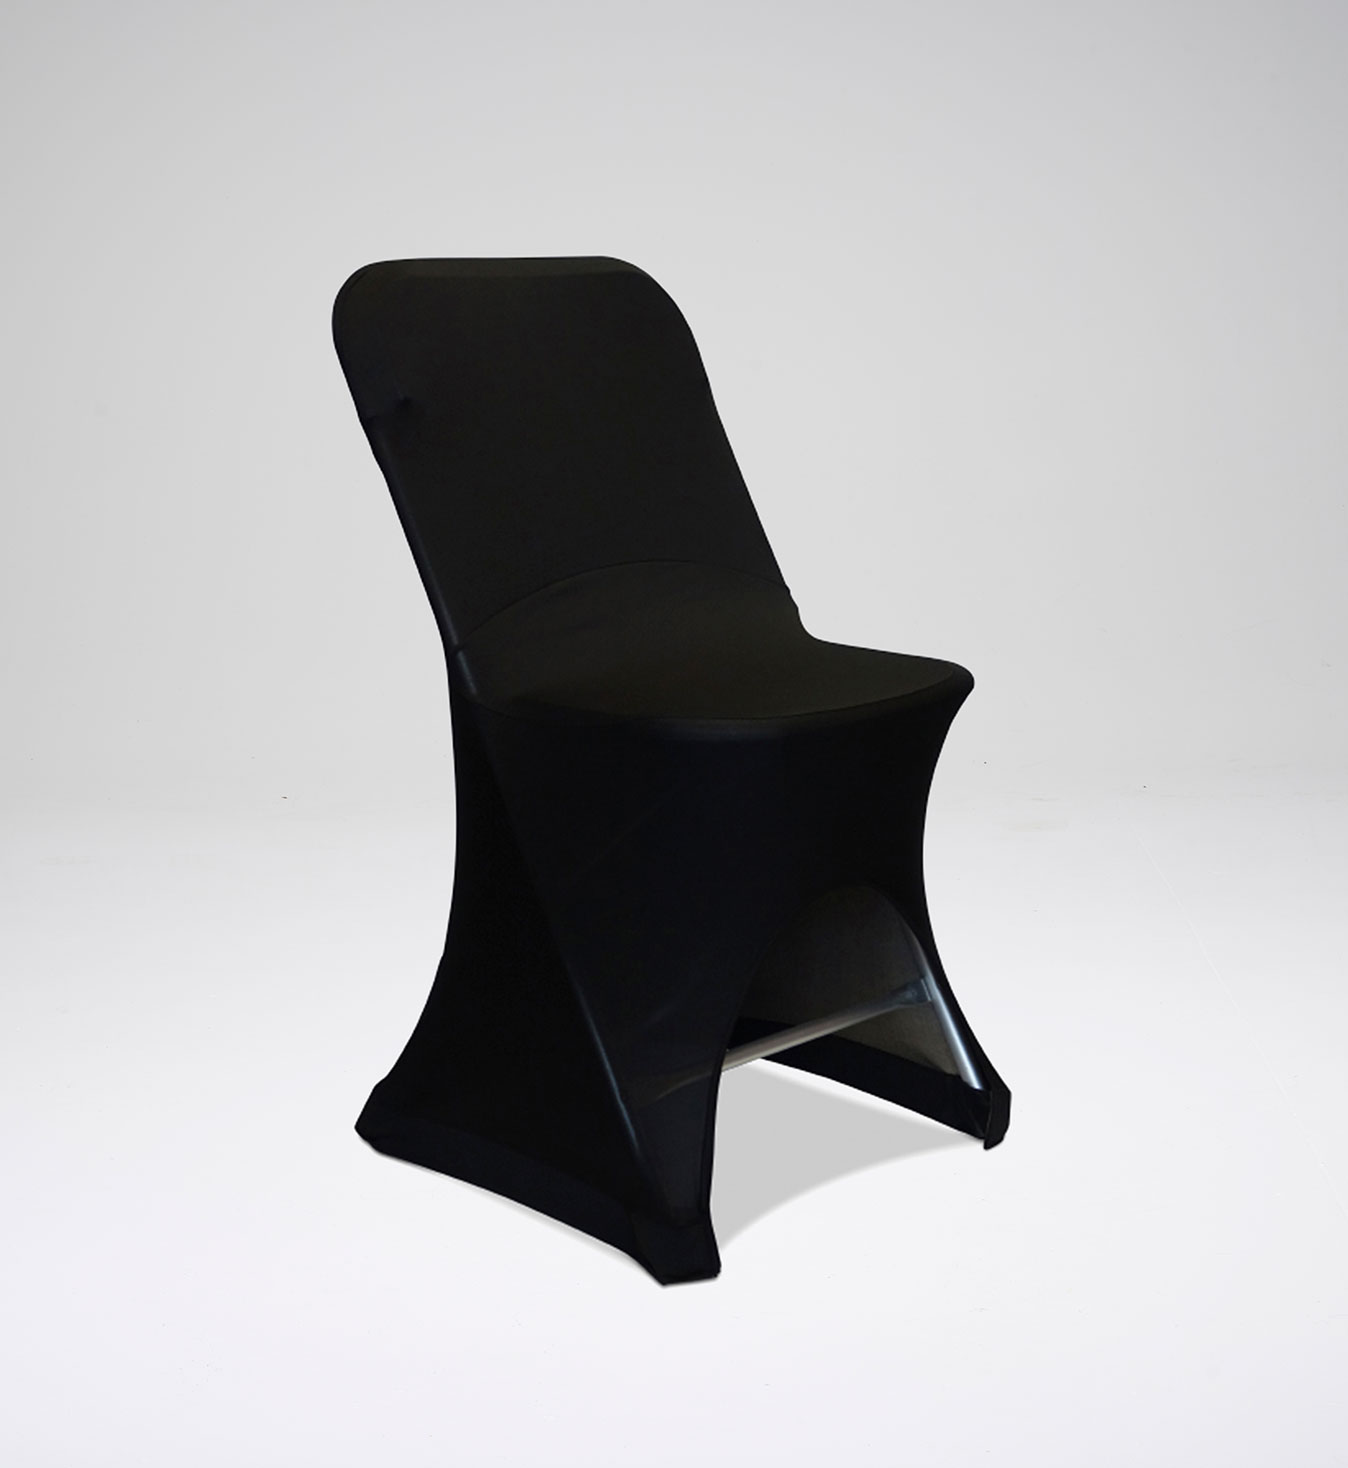 Lycra chair cover - Alloyfold  Commercial Seating & Furniture